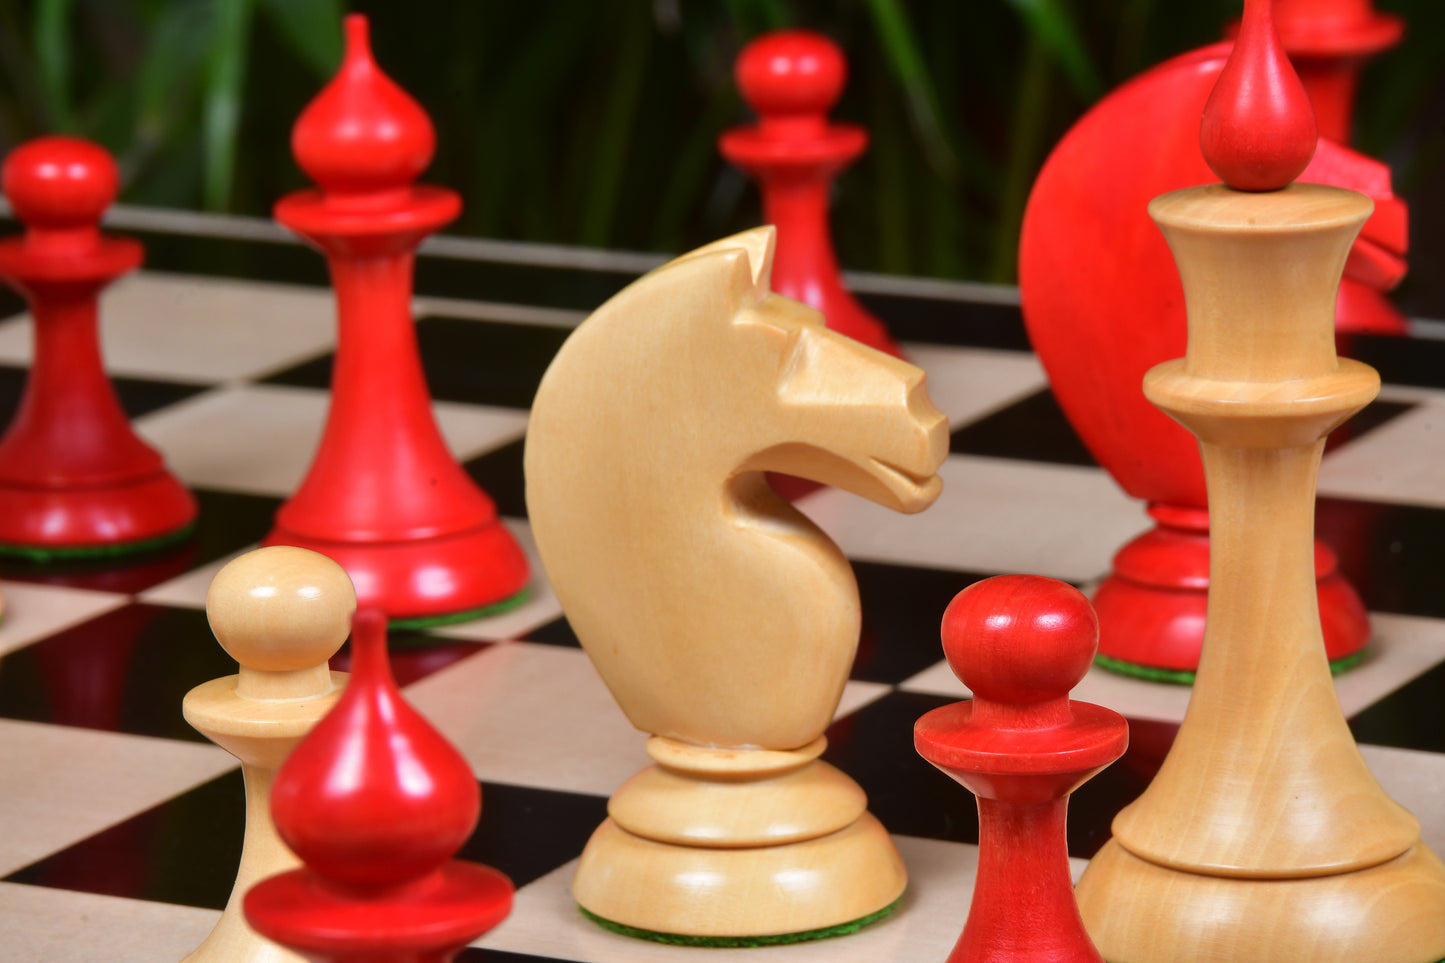 The 1950s Soviet (Russian) Latvian Reproduced Chess Pieces in Stained Crimson / Box Wood - 4.1" King